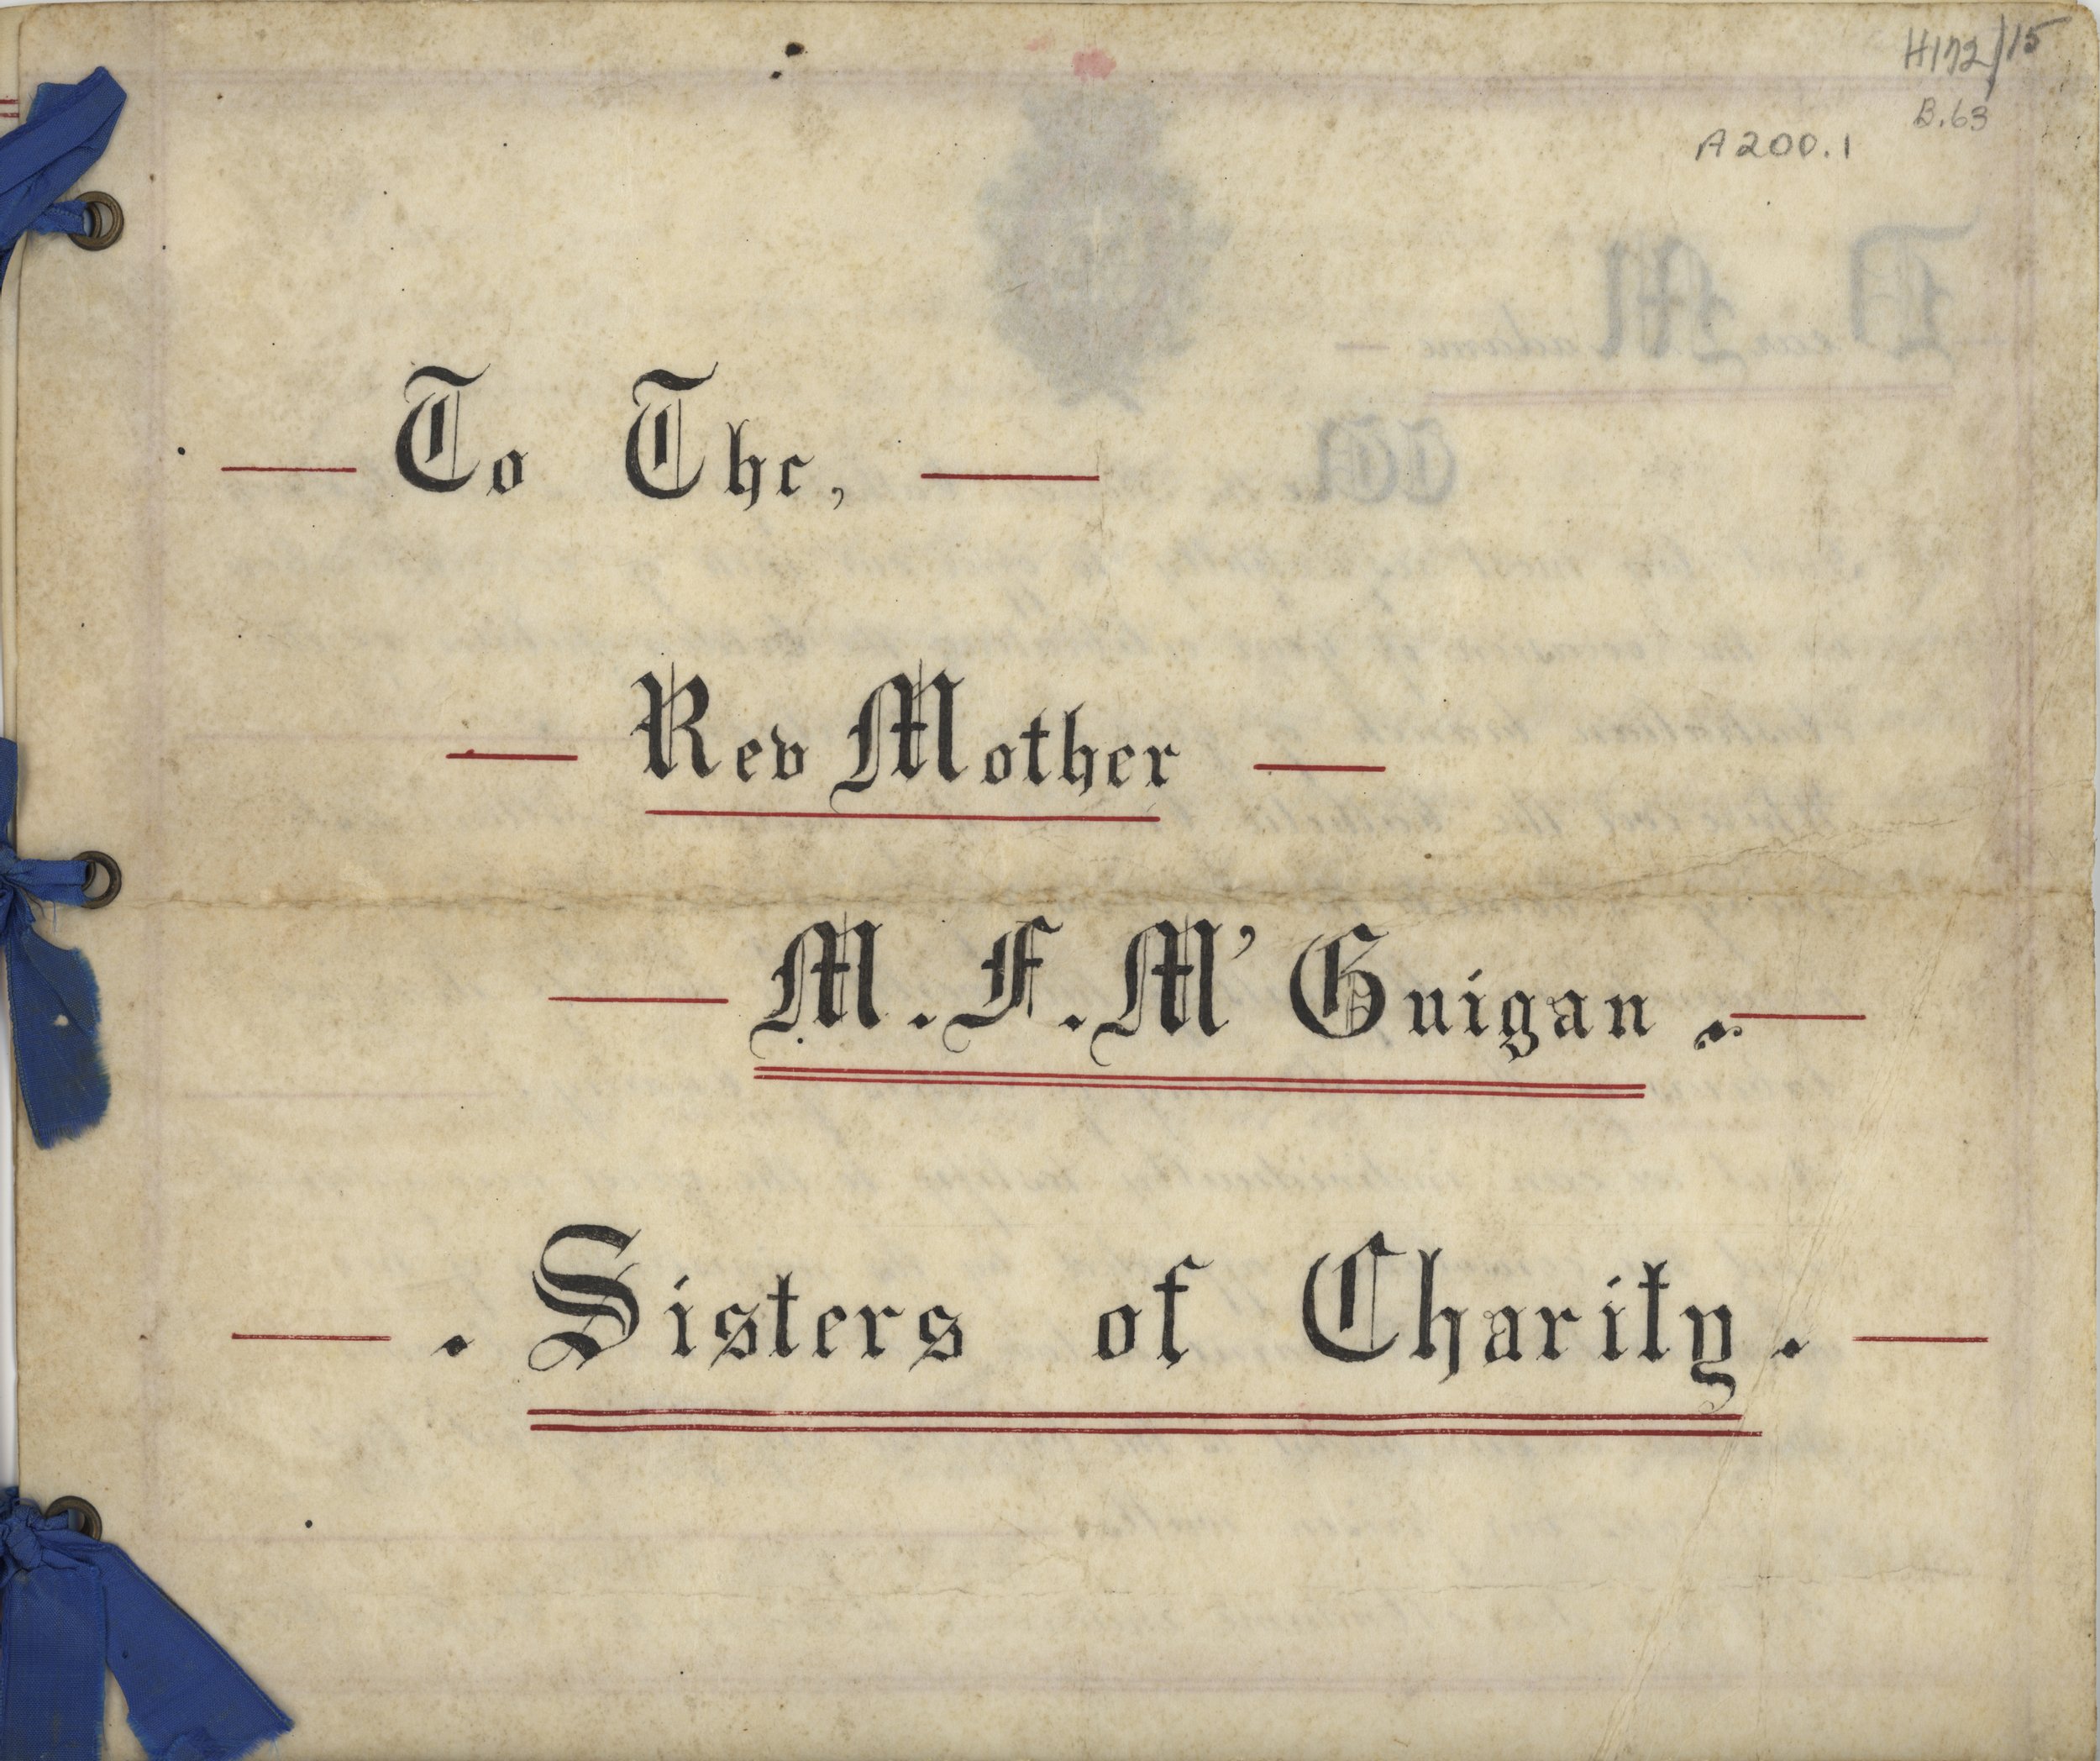  The cover page of a parchment letter sent by the Catholic prisoners at Darlinghurst Gaol to the Sisters of Charity in 1888 on the occasion of the 50th anniversary of their arrival in Australia.  